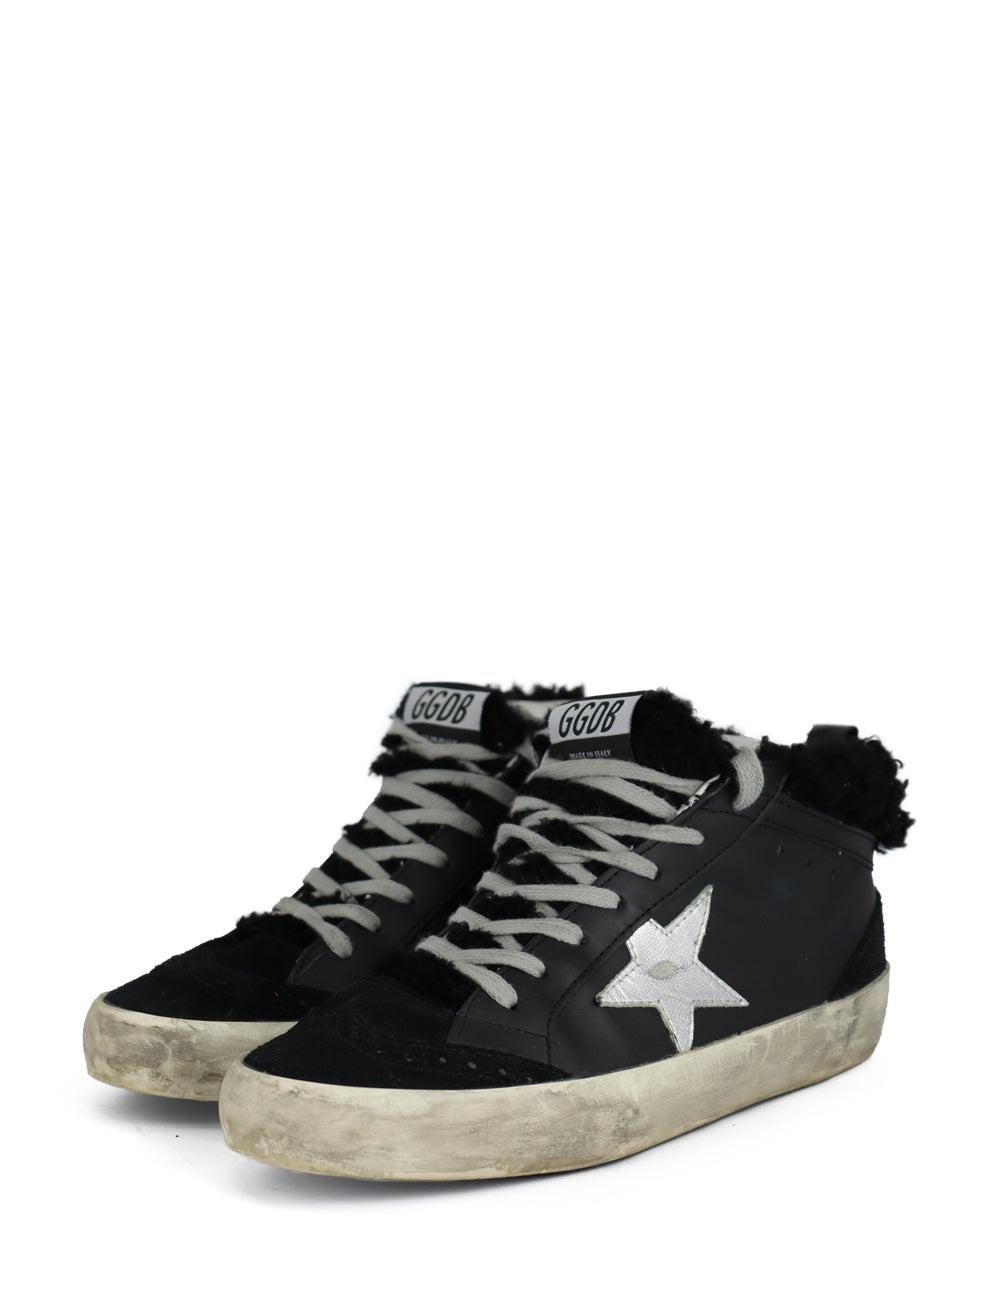 Golden Goose Midstar EU 37 Black Leather and Suede Fur-Lined Sneakers In Excellent Condition In Amman, JO